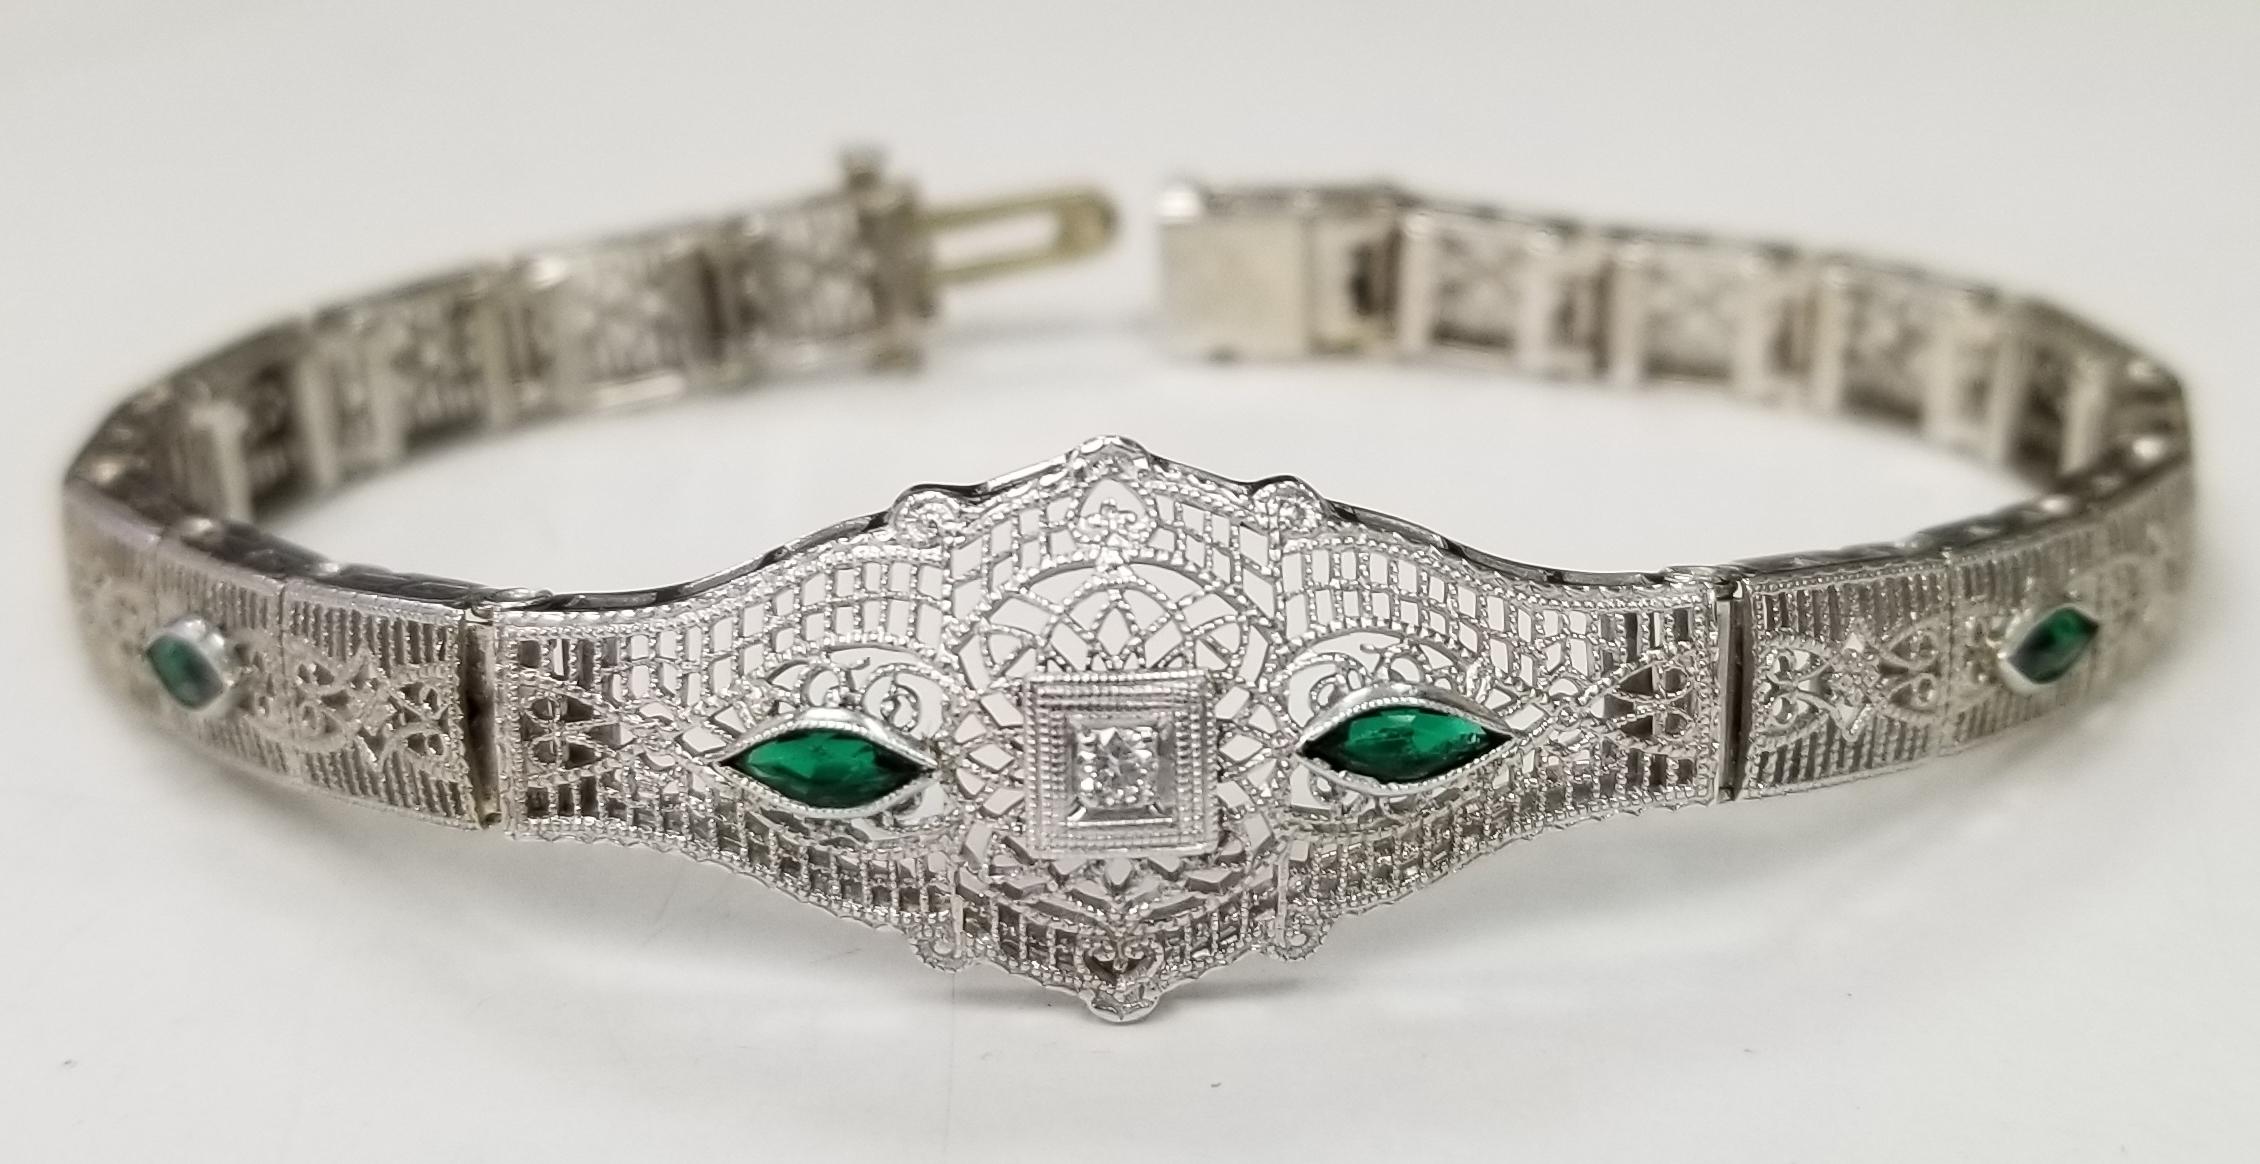 Beautiful women's Art Deco filigree bracelet in 14k white gold. This bracelet features round brilliant cut diamonds and  marquise emeralds.  The bracelet has a solid clasp and safety. 
*Motivated to Sell – Please make a Fair Offer*
Specifications:
 